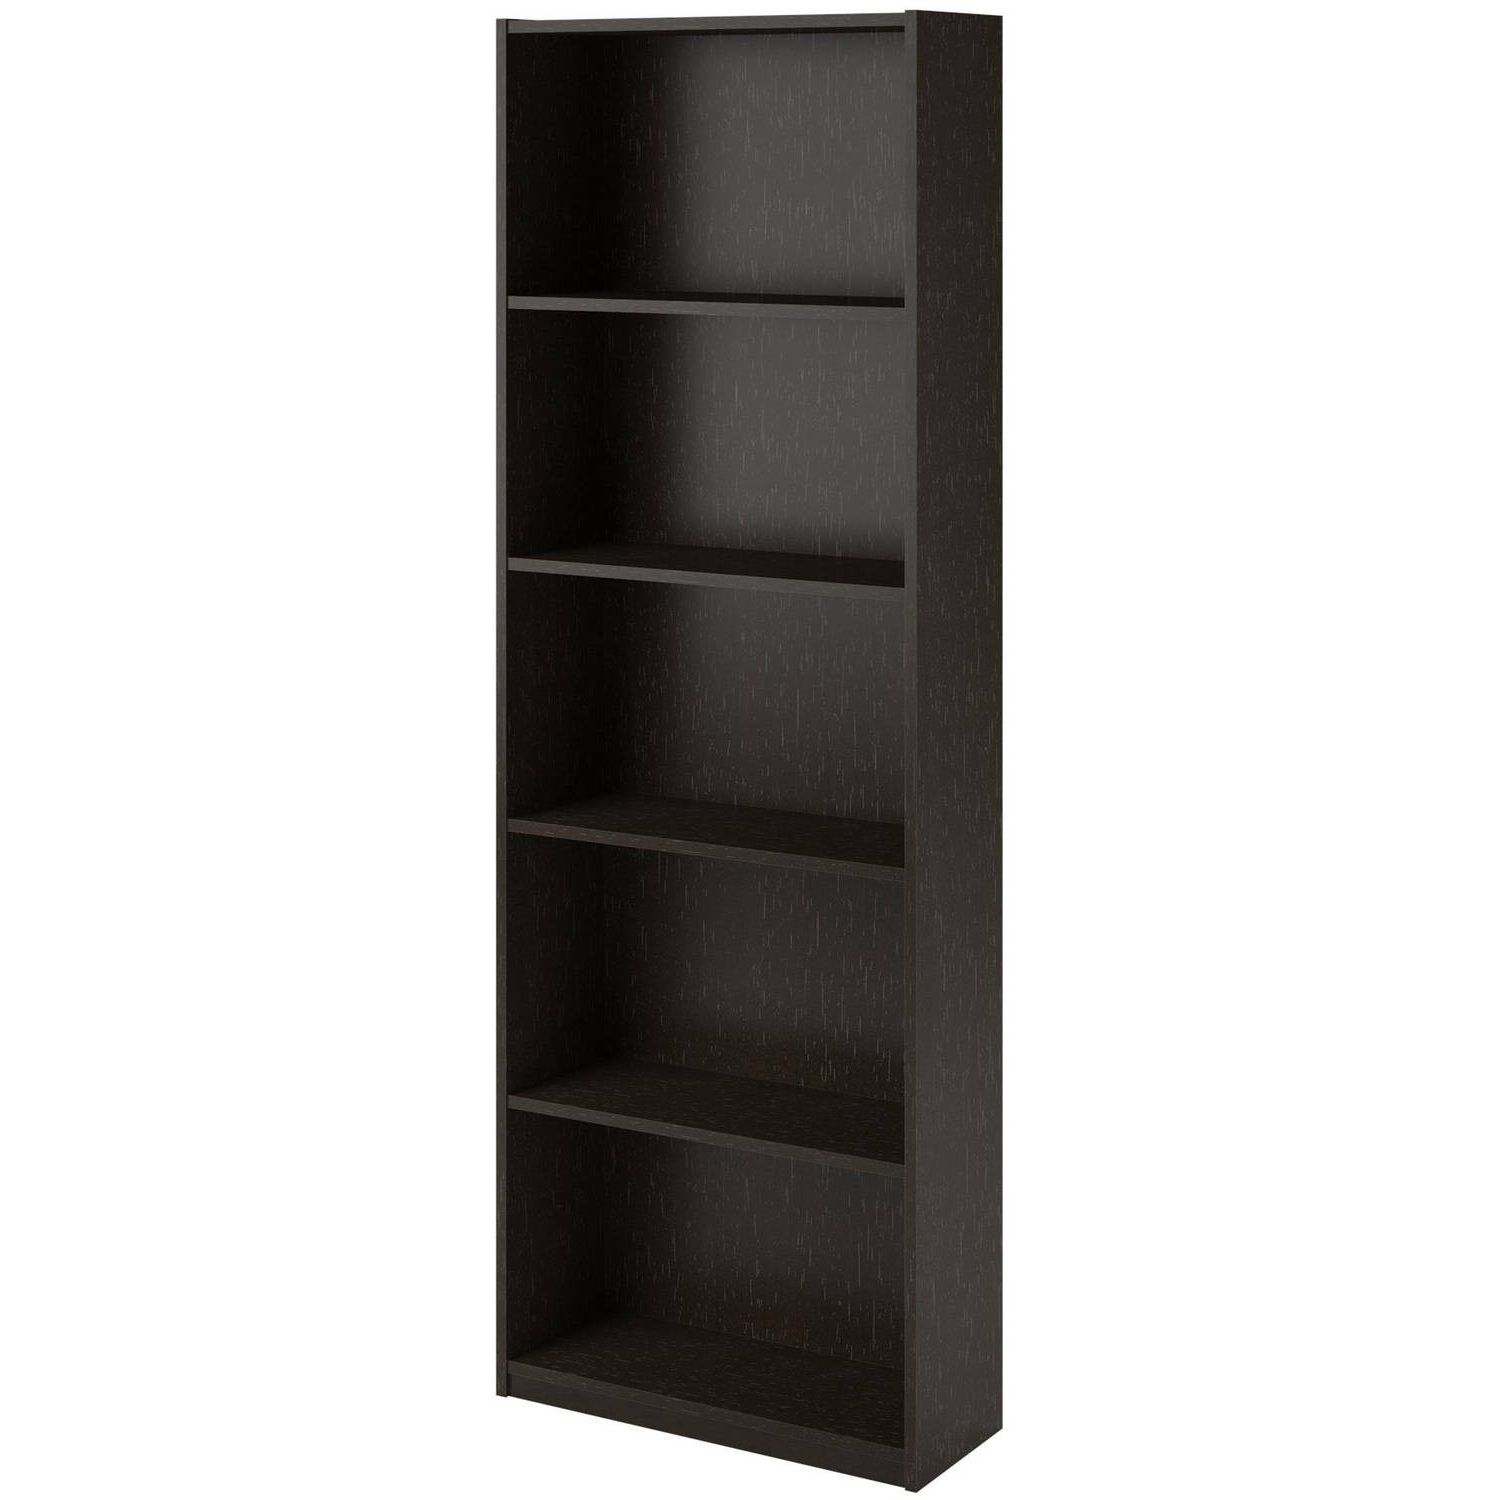 Best And Newest Furniture : Amazing Bookcases From Walmart New Ameriwood 5 Shelf Pertaining To 3 Shelf Bookcases Walmart (View 1 of 15)